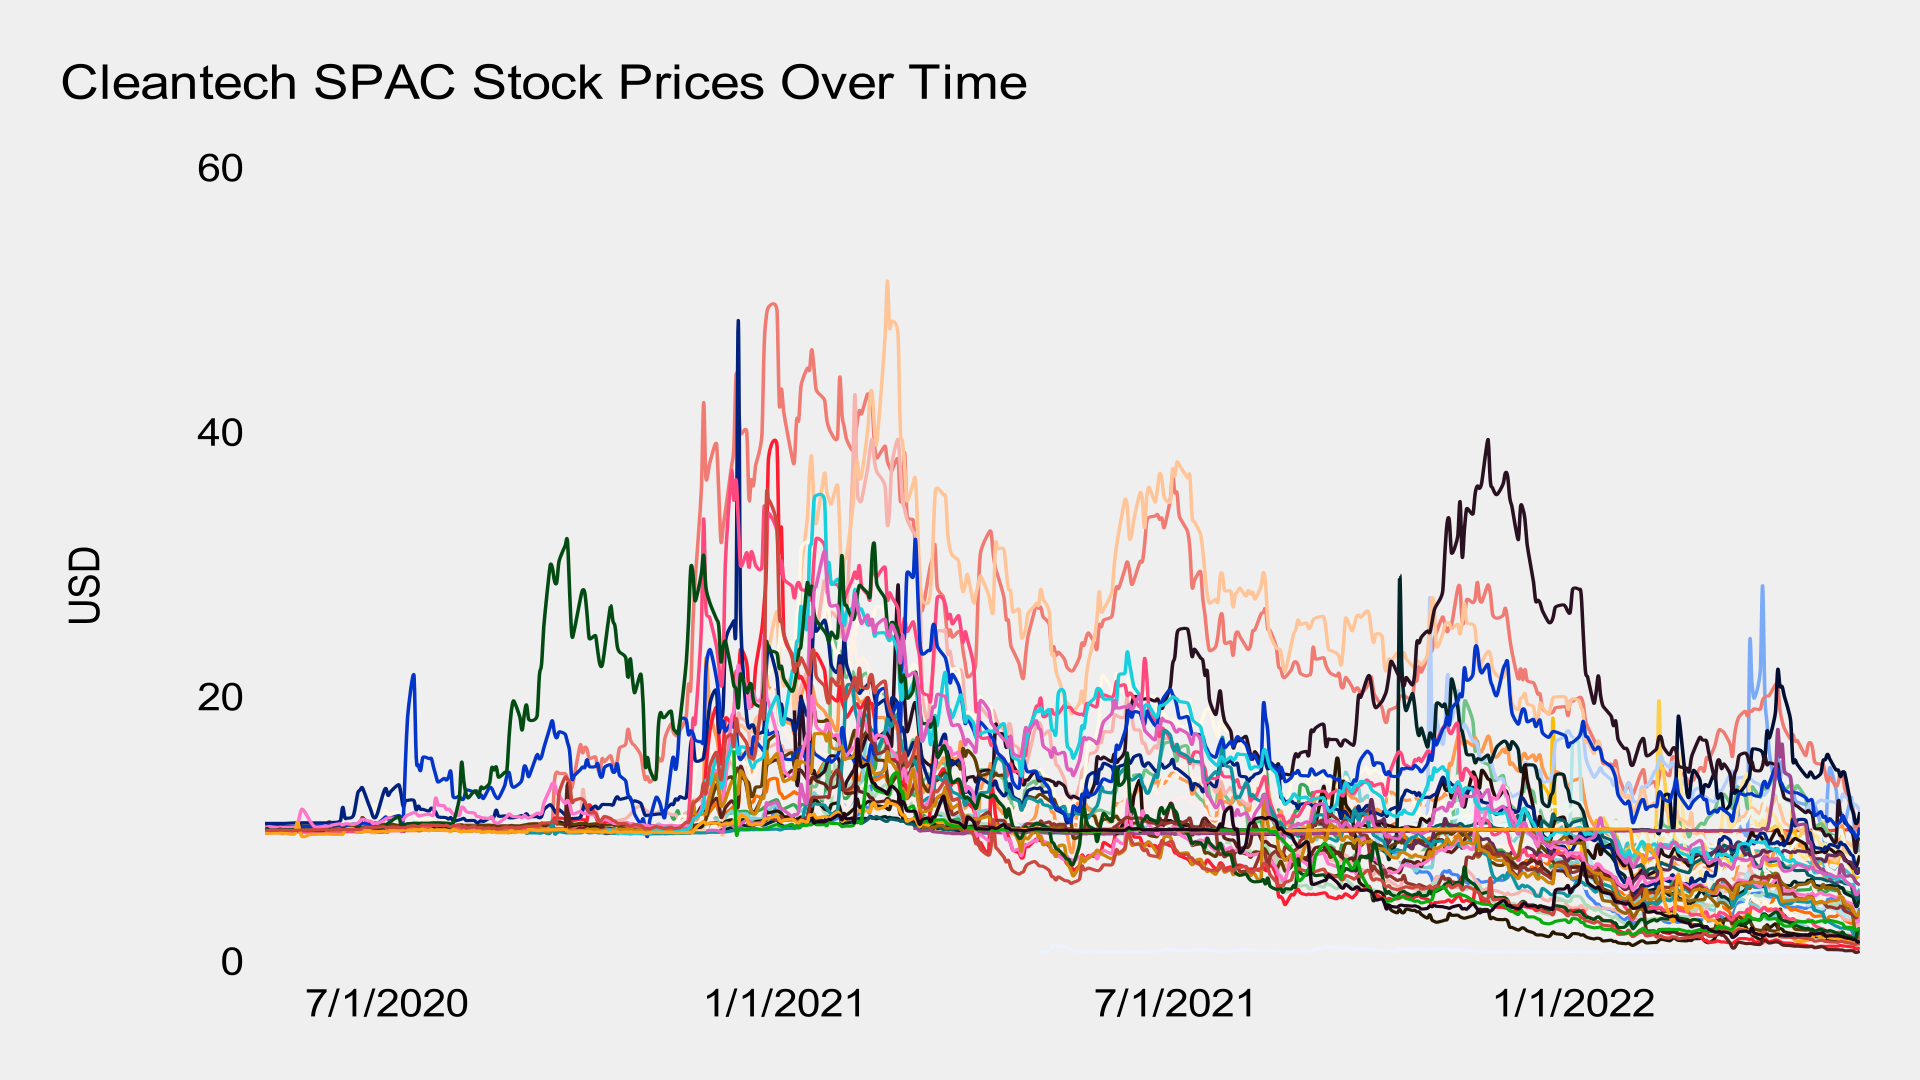 Cleantech SPAC Stock Prices Over Time, chart by author